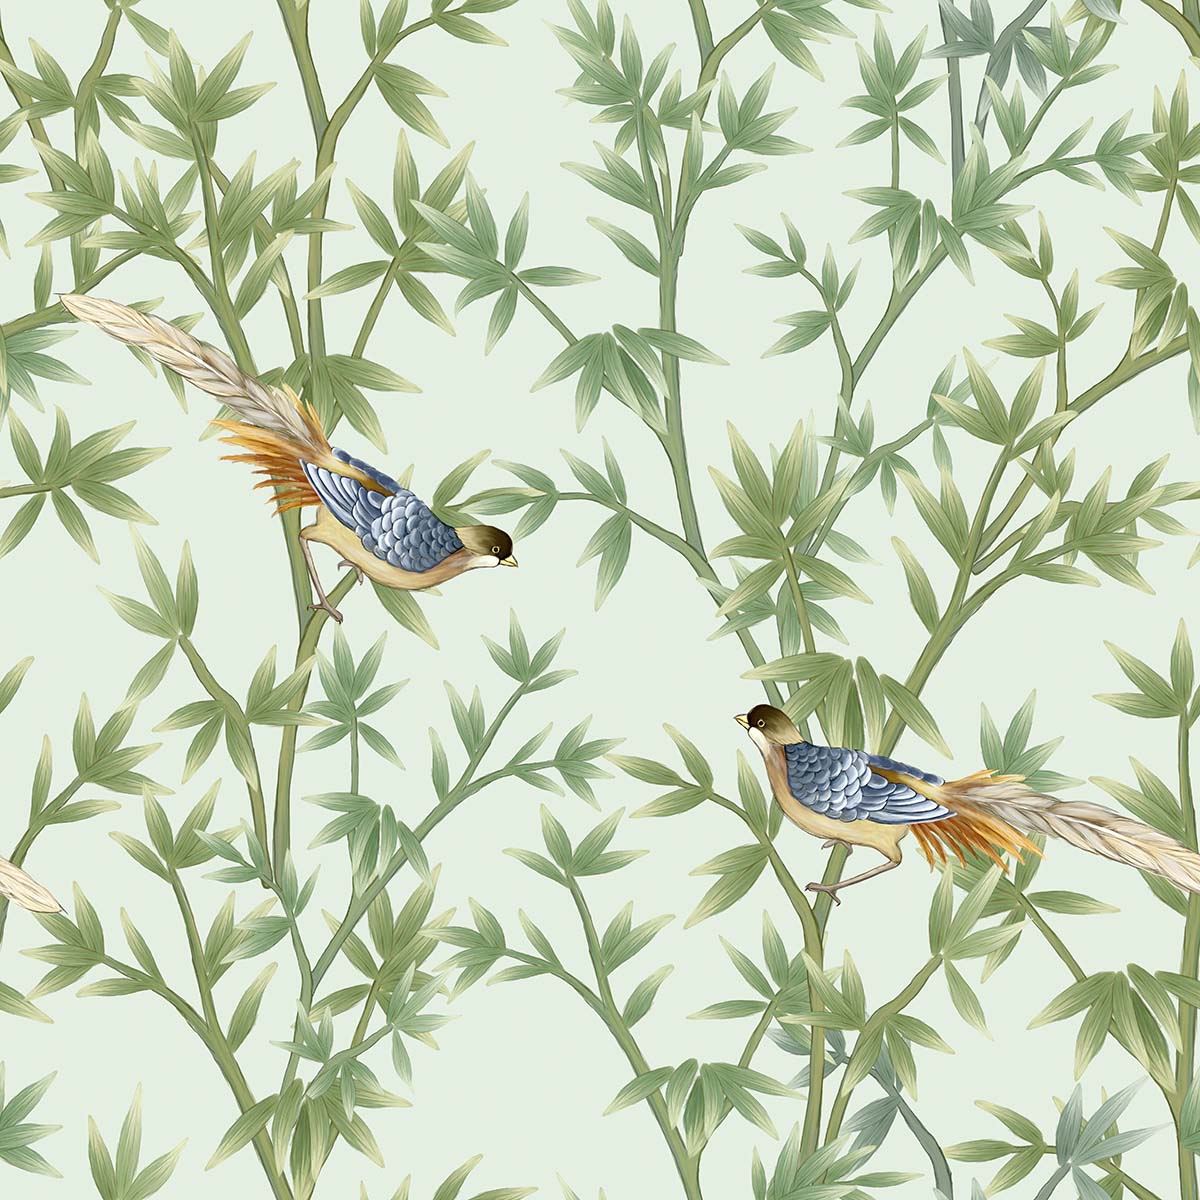 A wallpaper with birds on branches